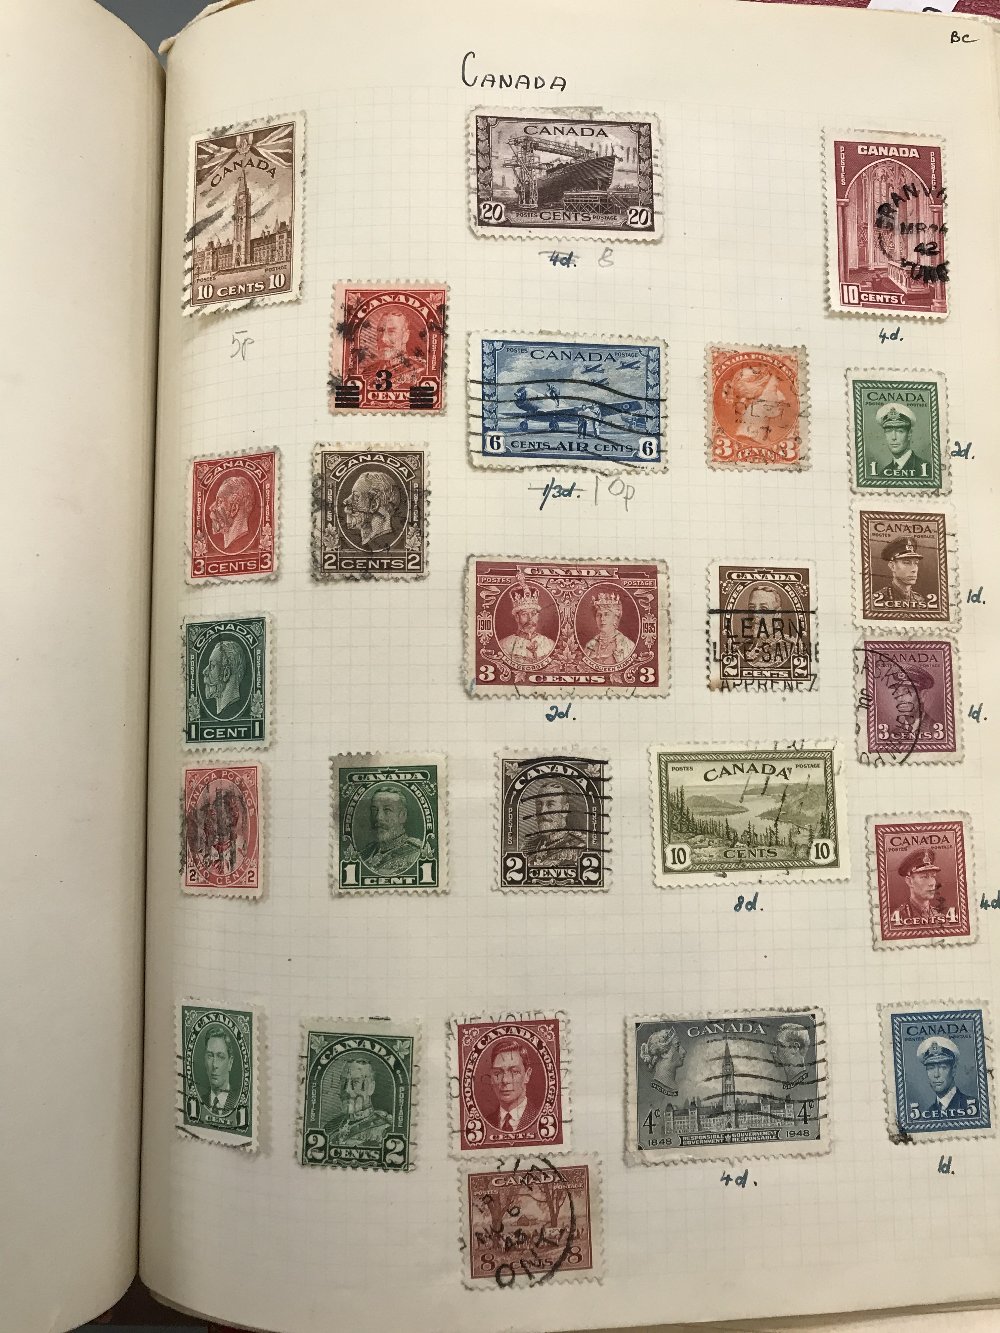 Stamps & First Day Covers: Two stockbooks, one album of World stamps, and a large selection of first